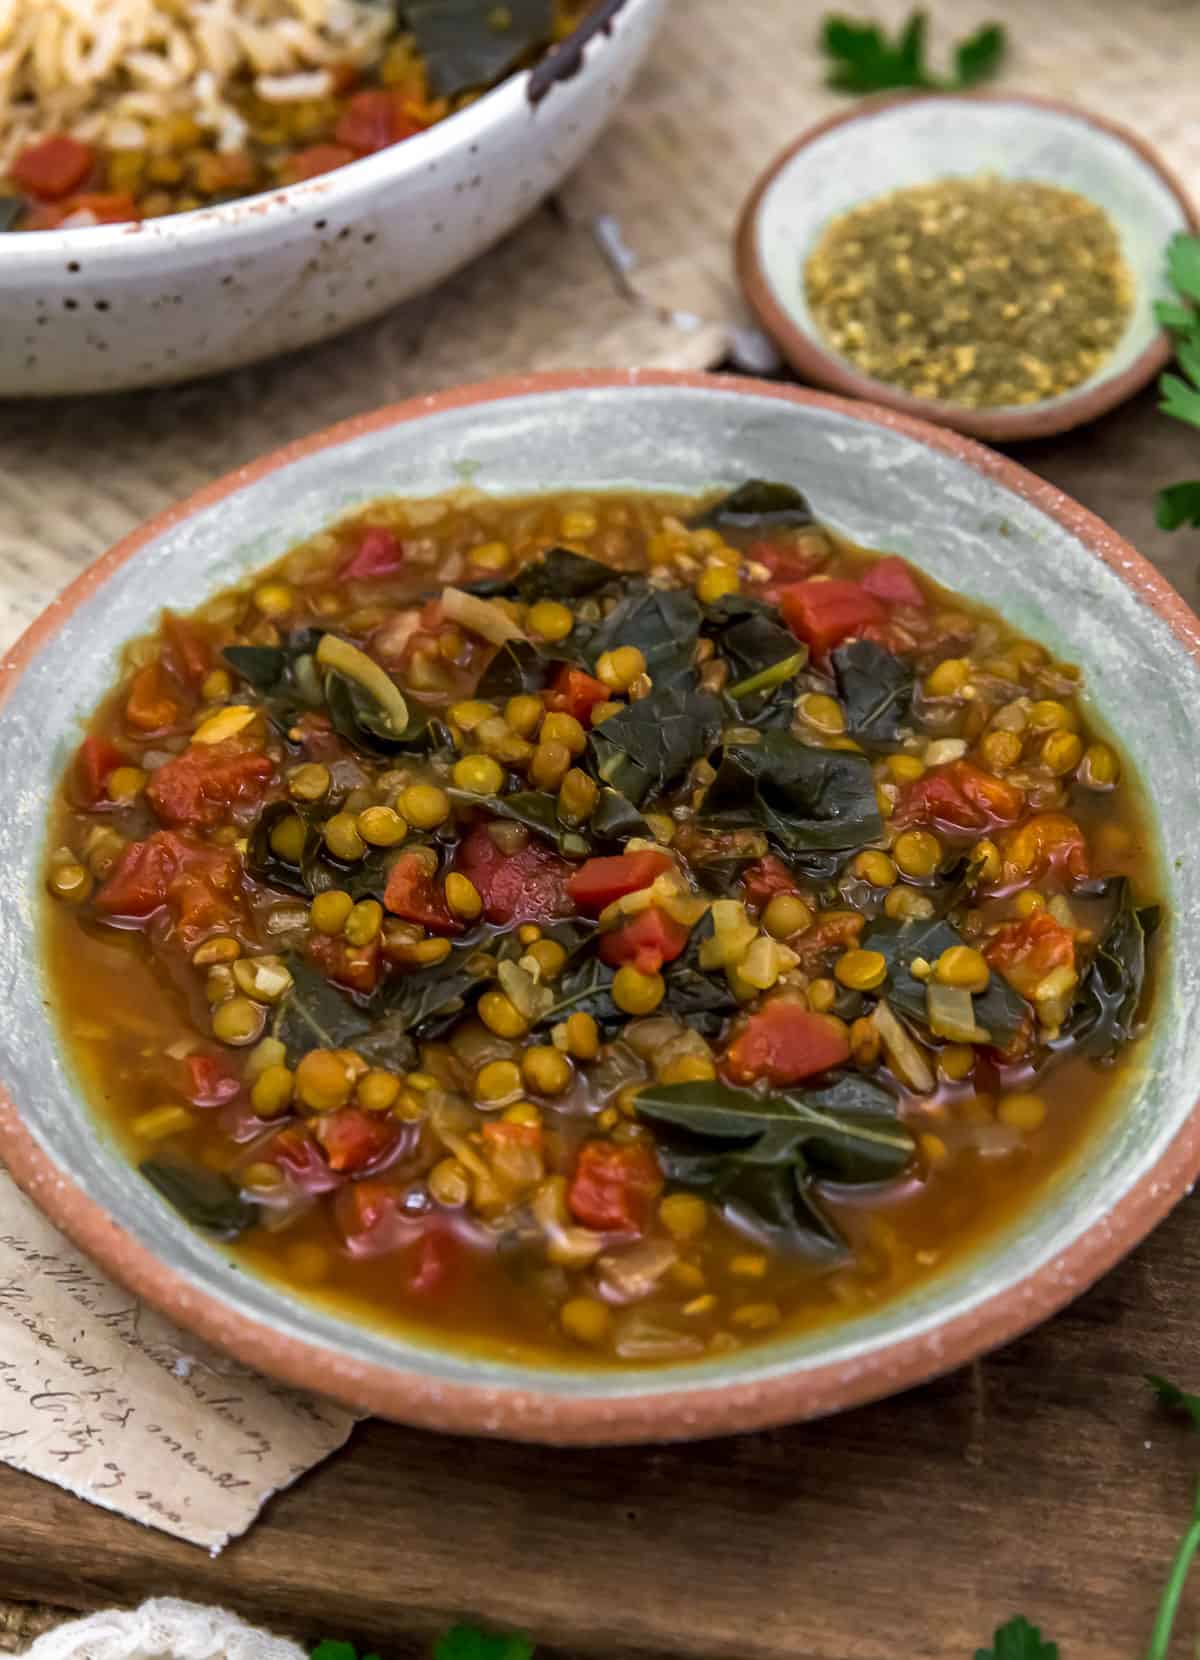 Bowl of Spiced Lentils and Collard Greens